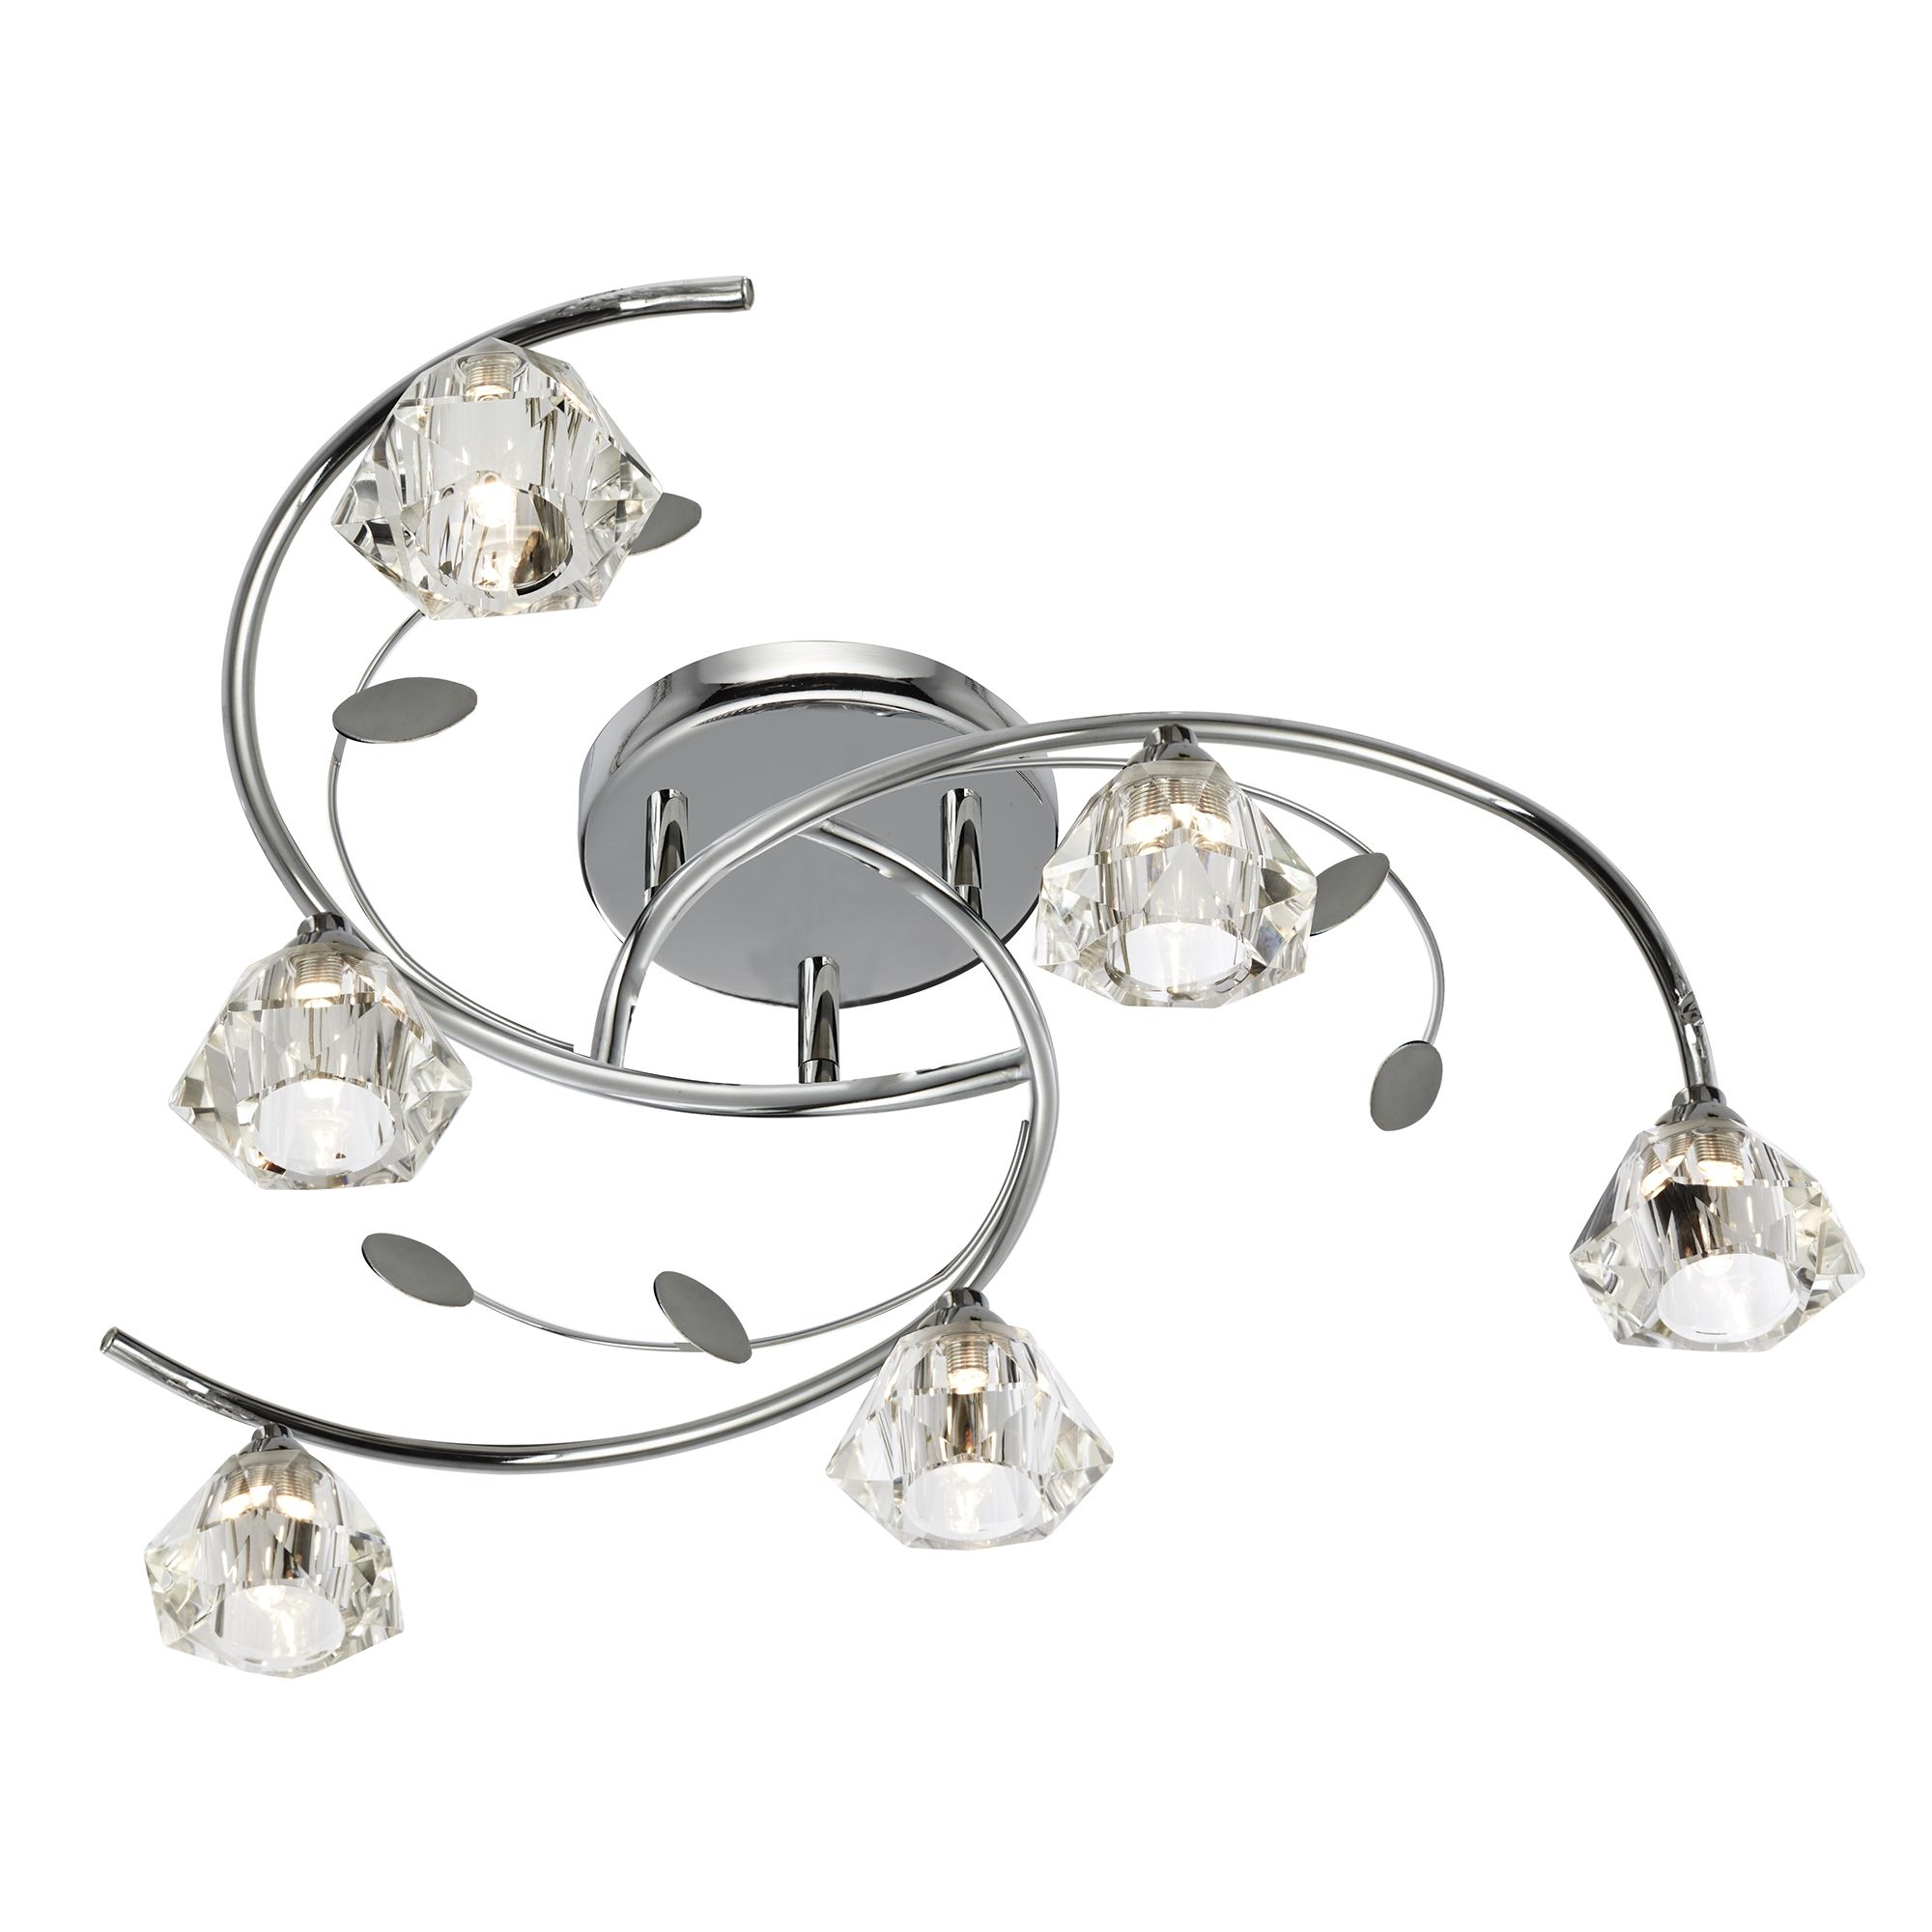 Sienna 6 Light Semi-Flush Ceiling Fitting with Sculptured Glass Shades